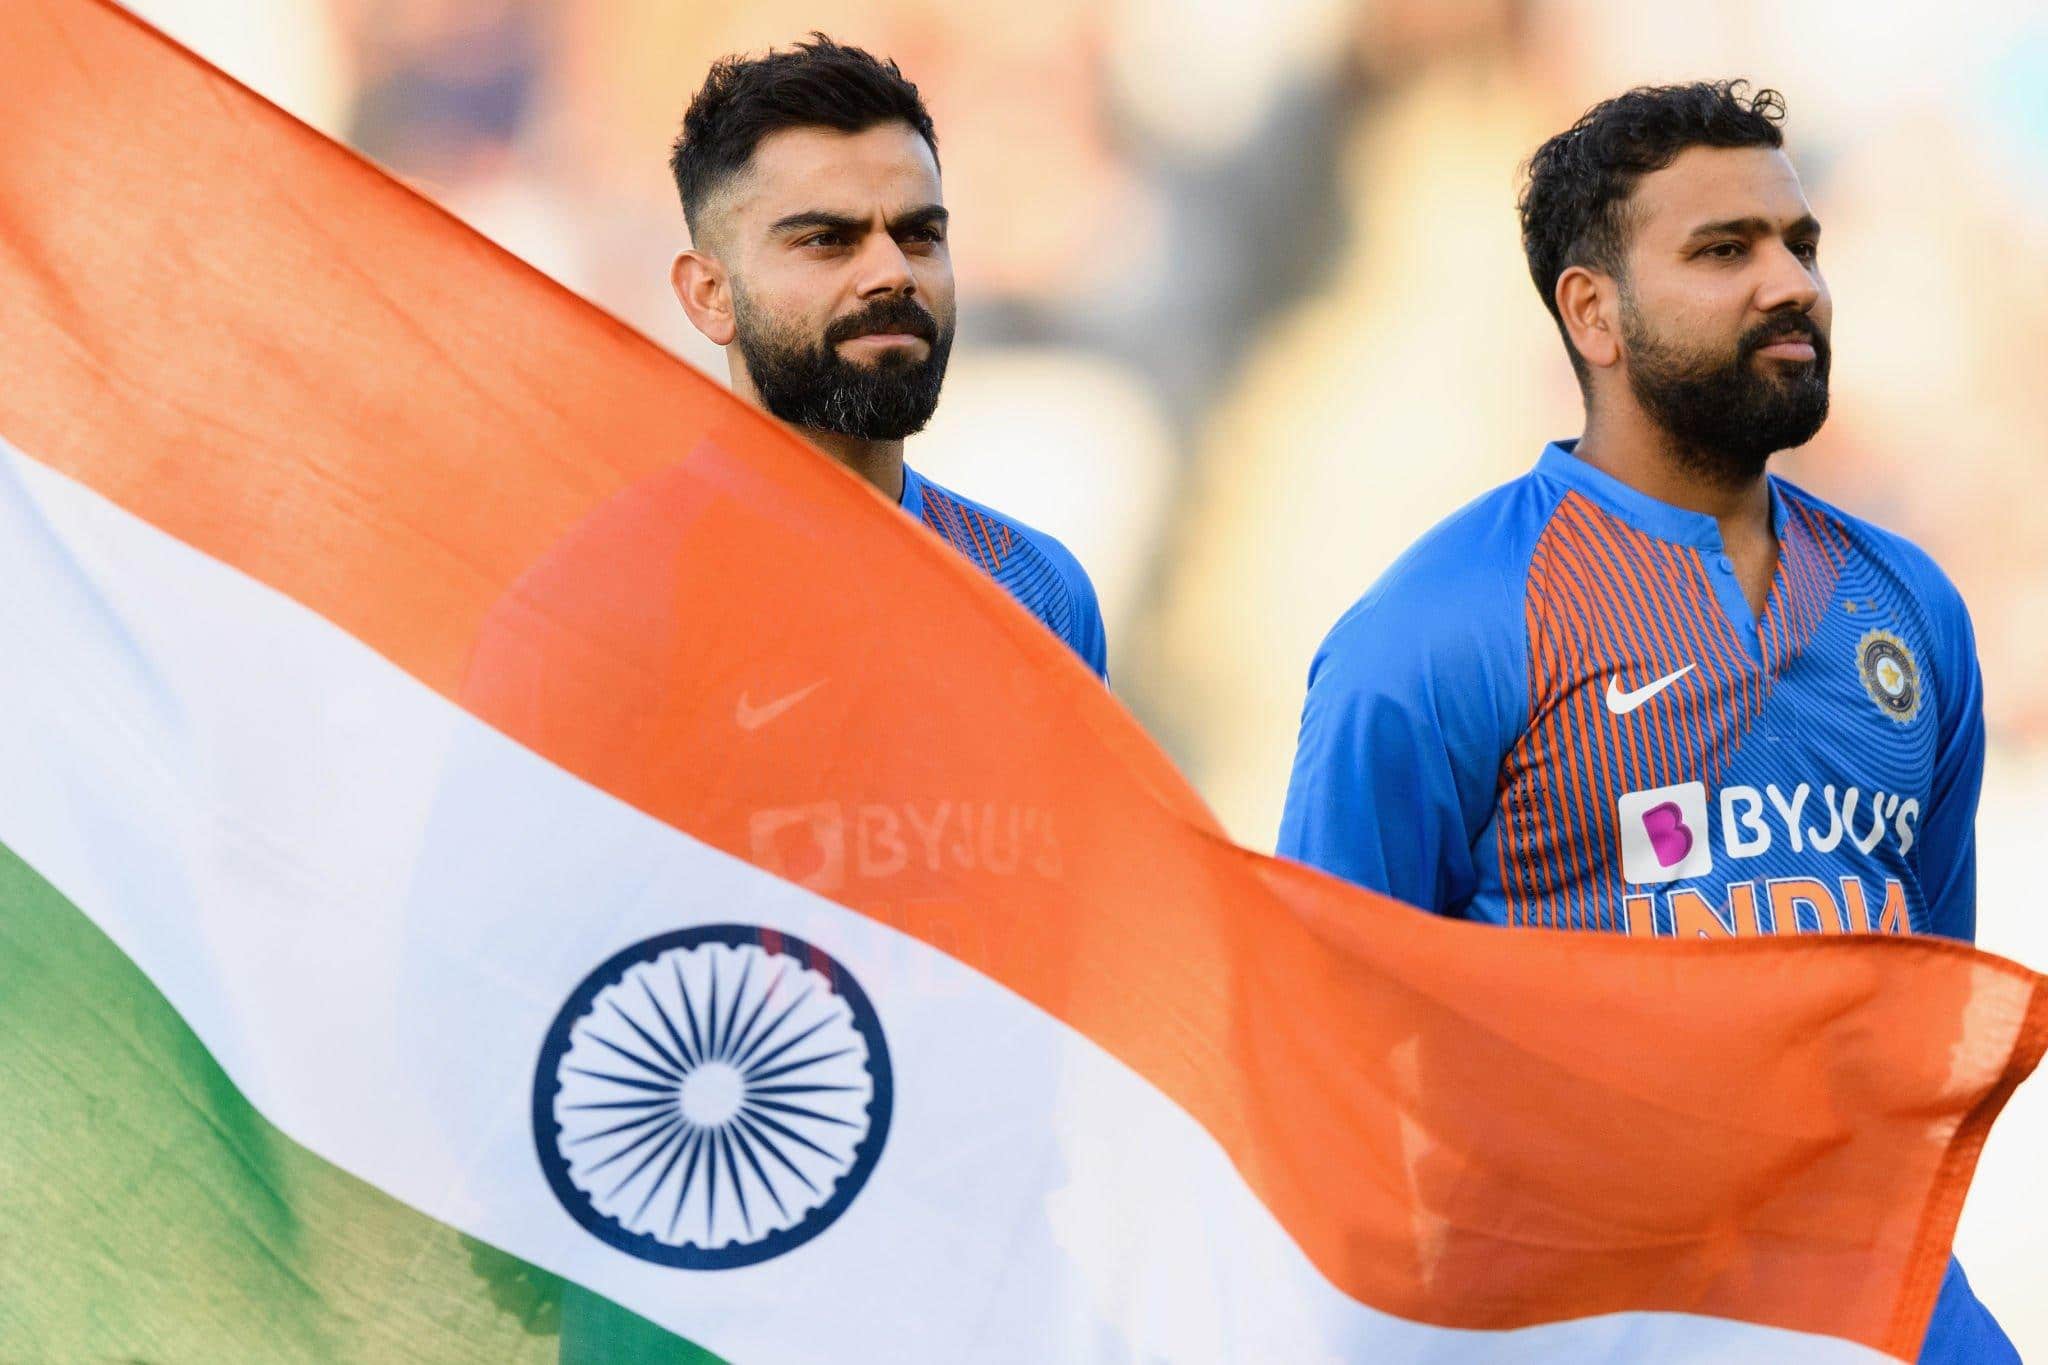 India's Probable Squad For 2023 World Cup | Will Samson and Chahal Be Axed?